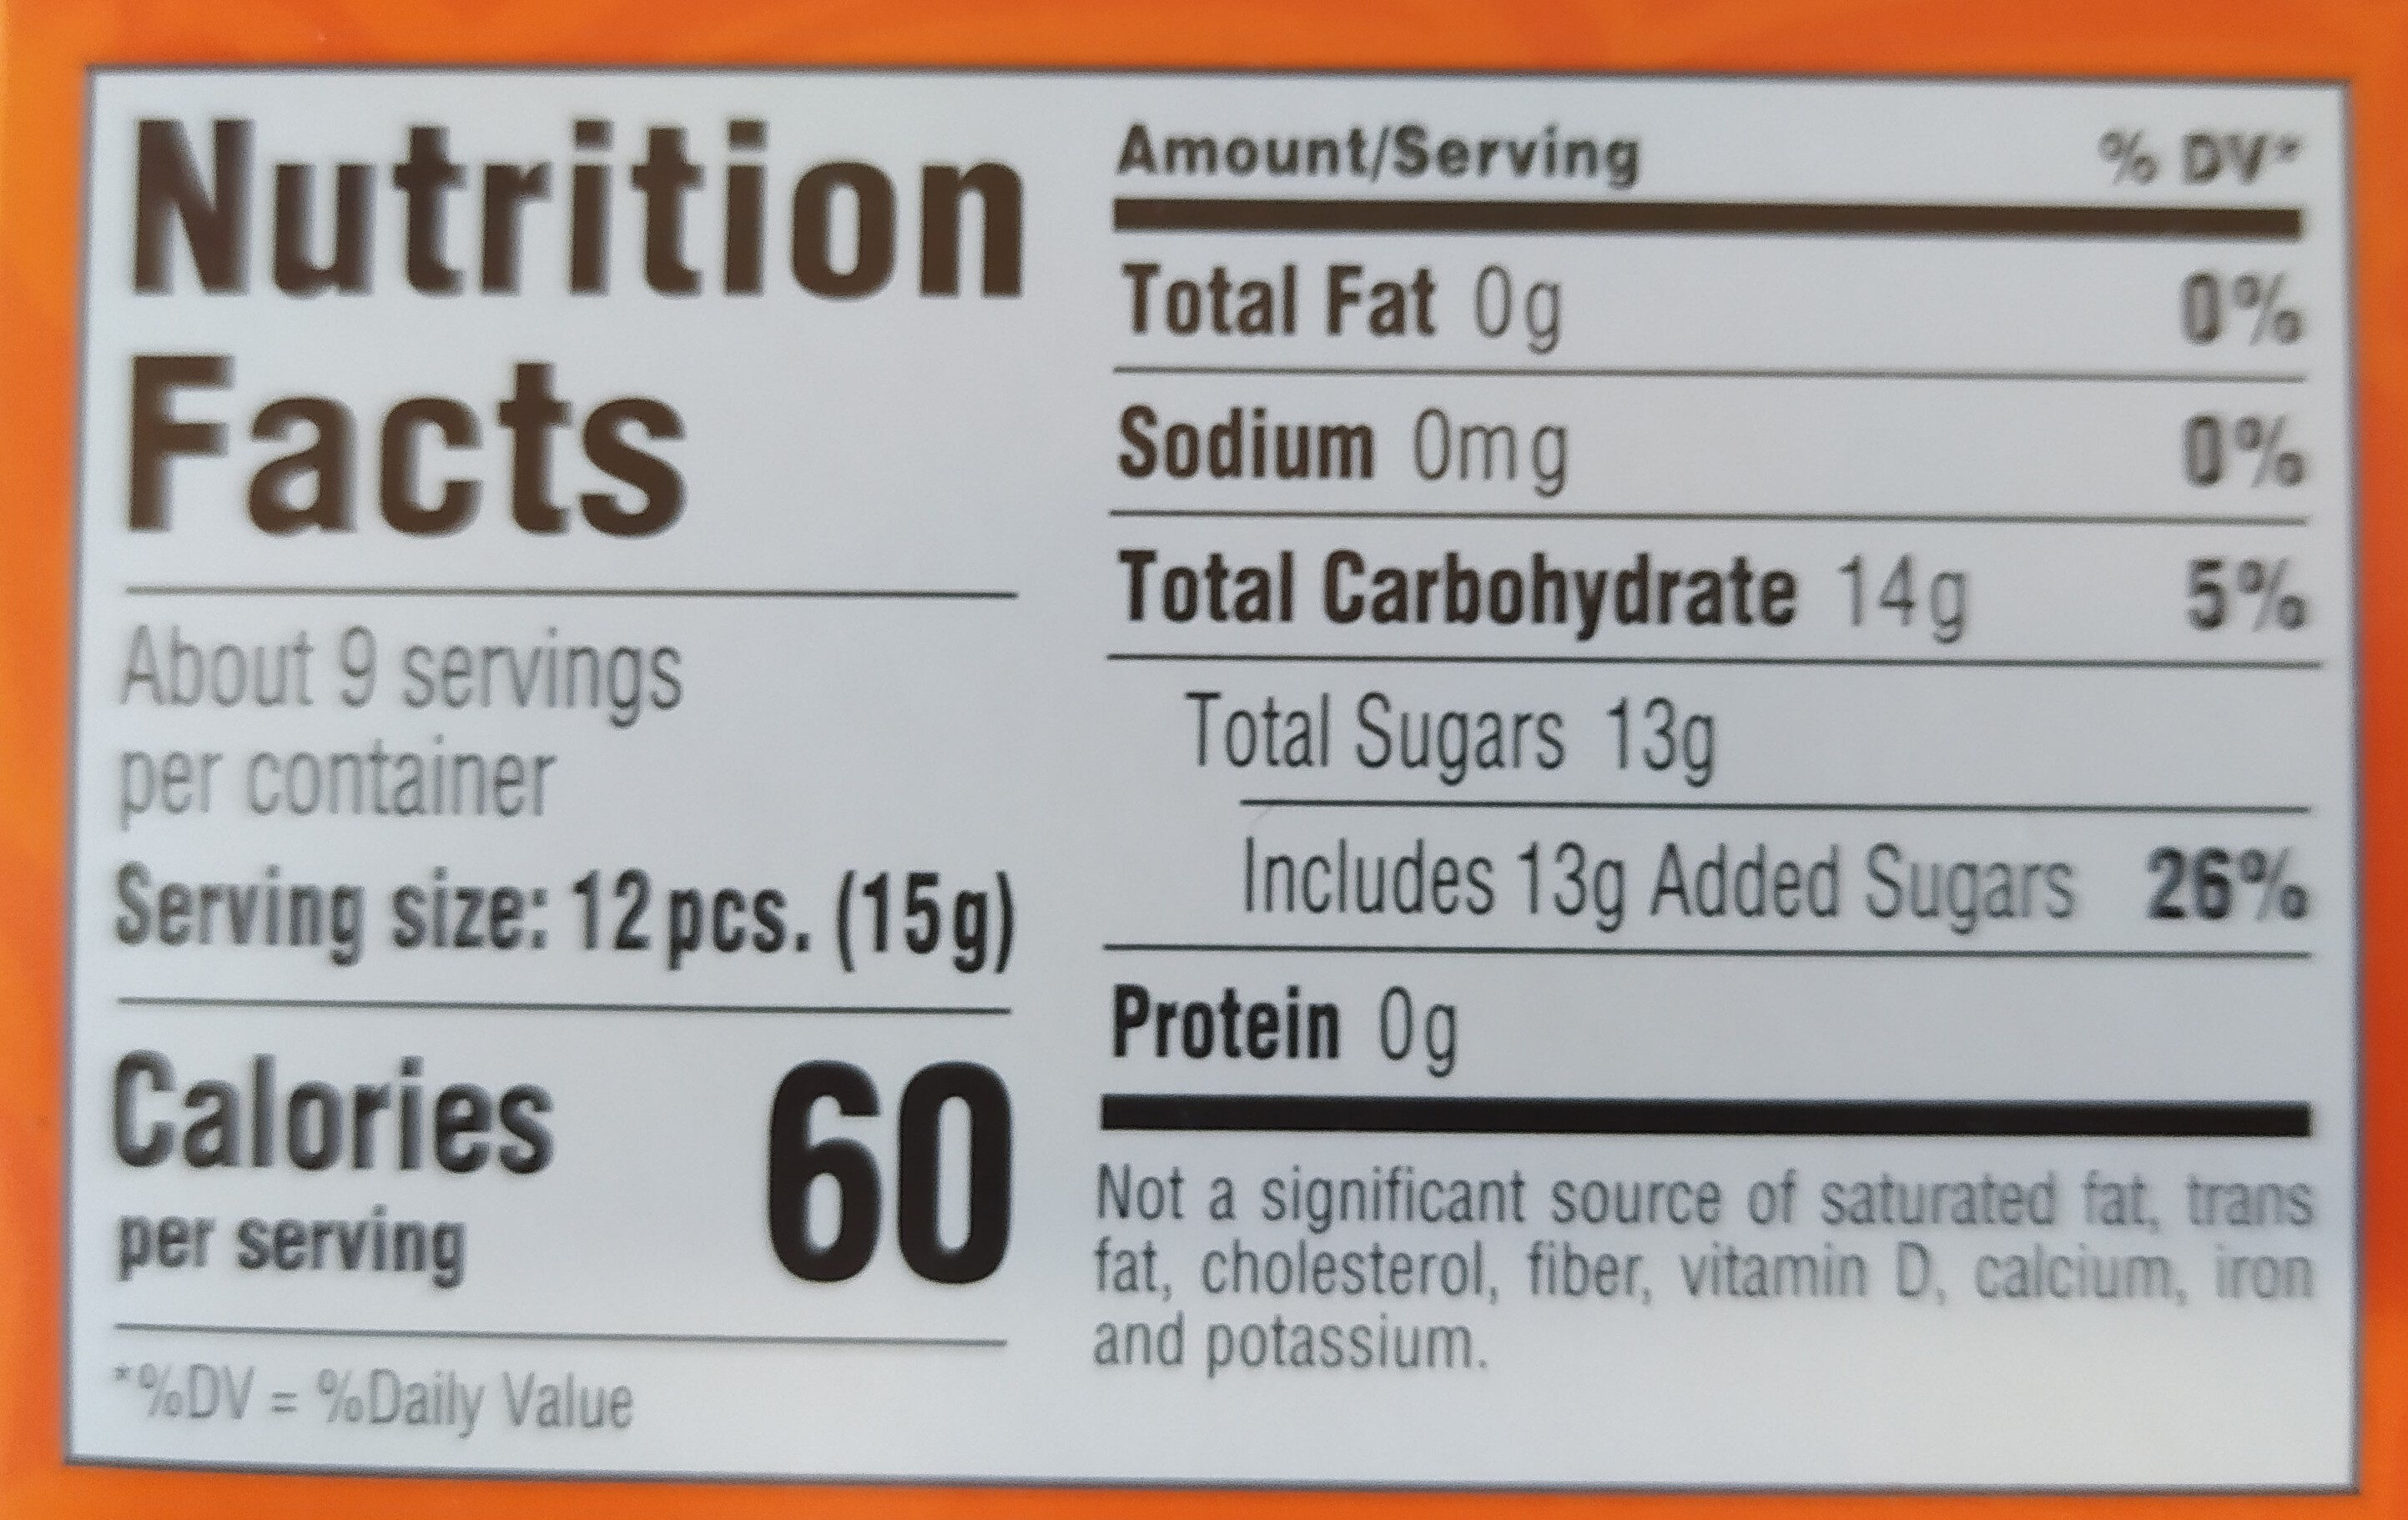 Candy theater box - Nutrition facts